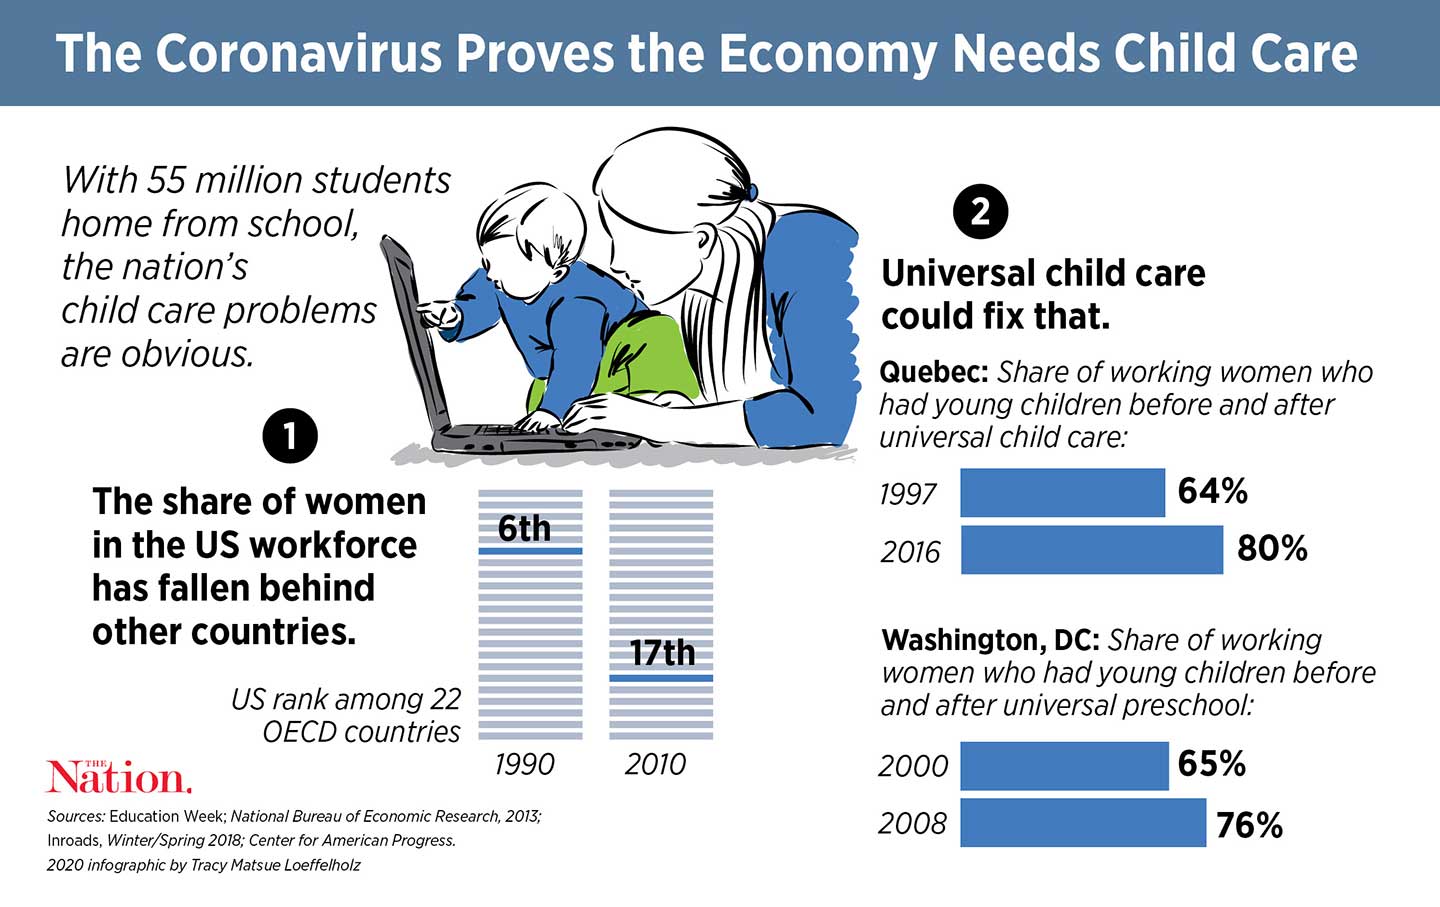 We Can’t Save the Economy Without Universal Child Care